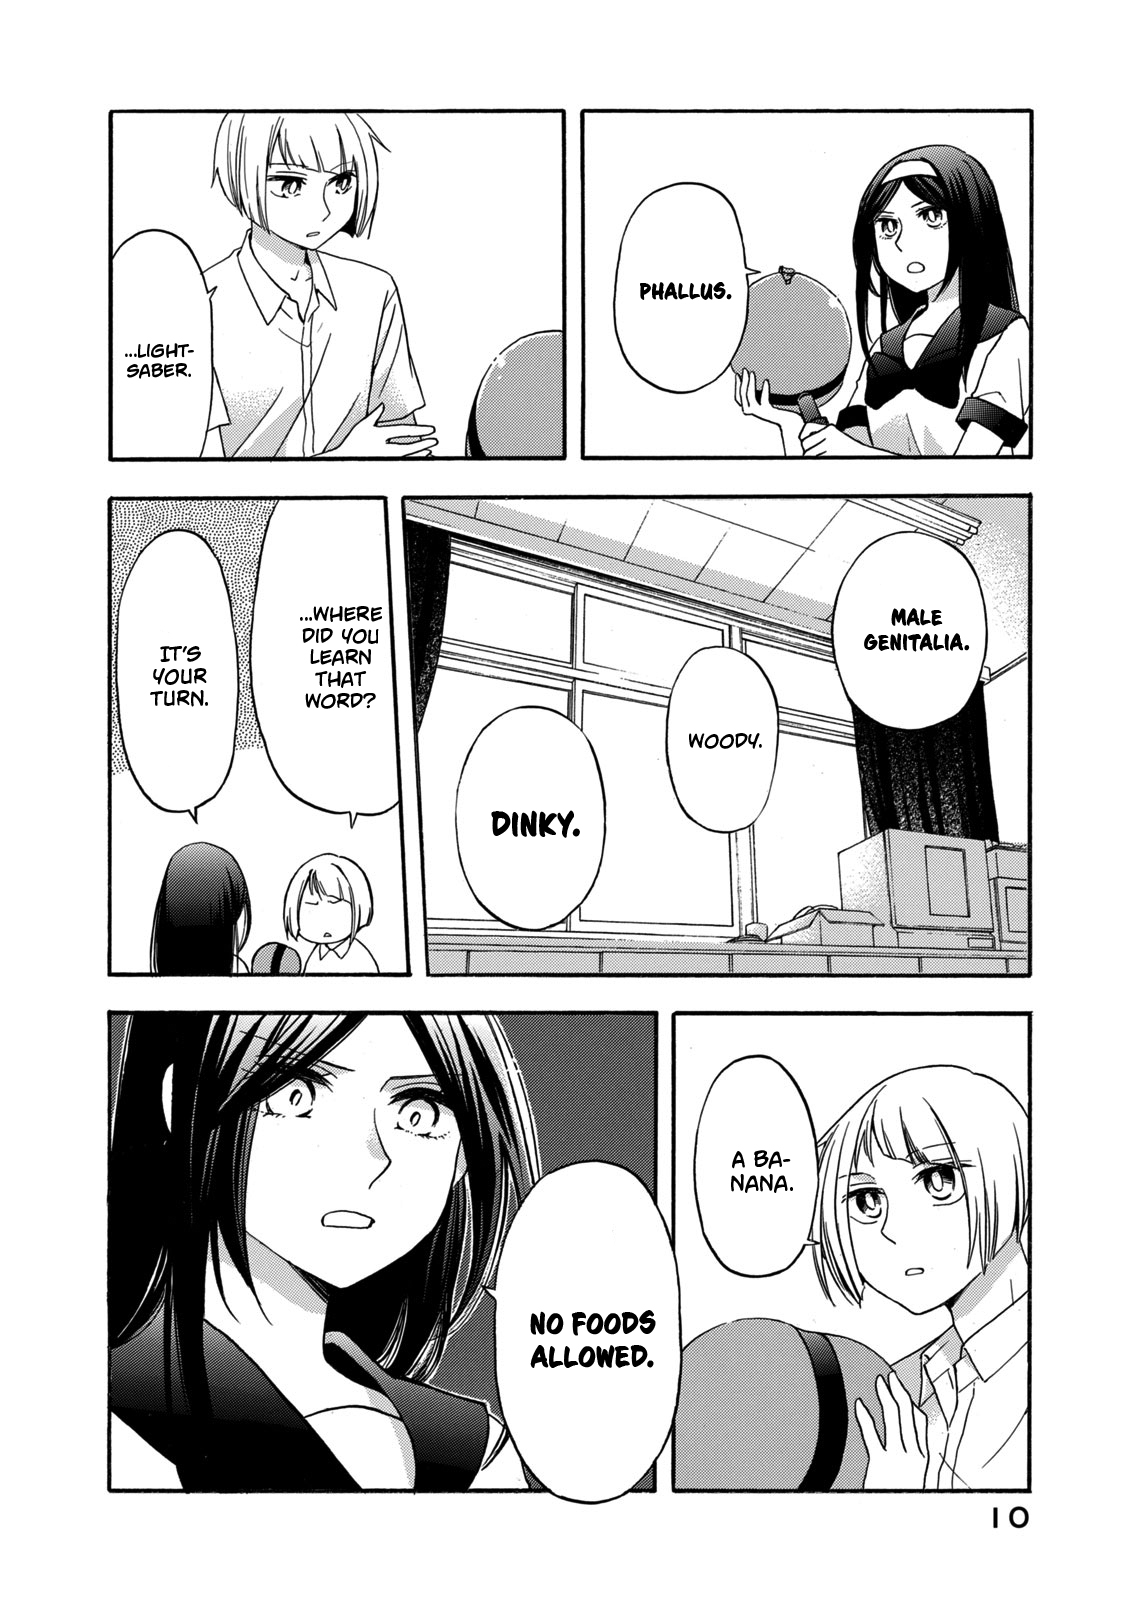 Hanazono and Kazoe's Bizarre After School Rendezvous Vol. 2 Ch. 9 An Inexplicable Game